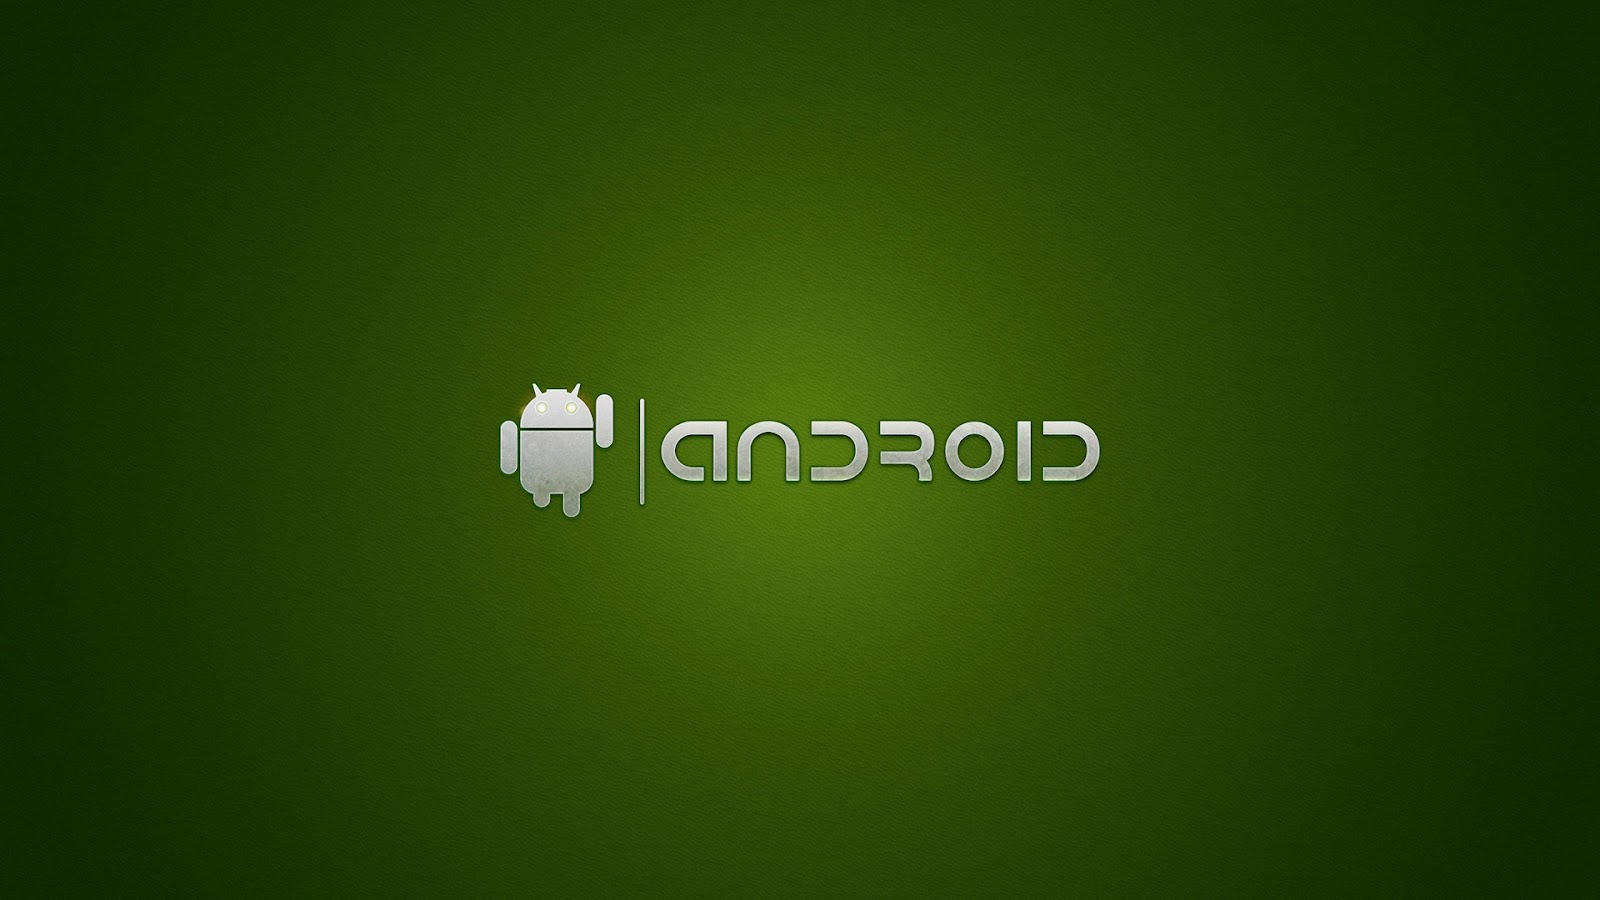 android application development tutorial for beginners pdf download